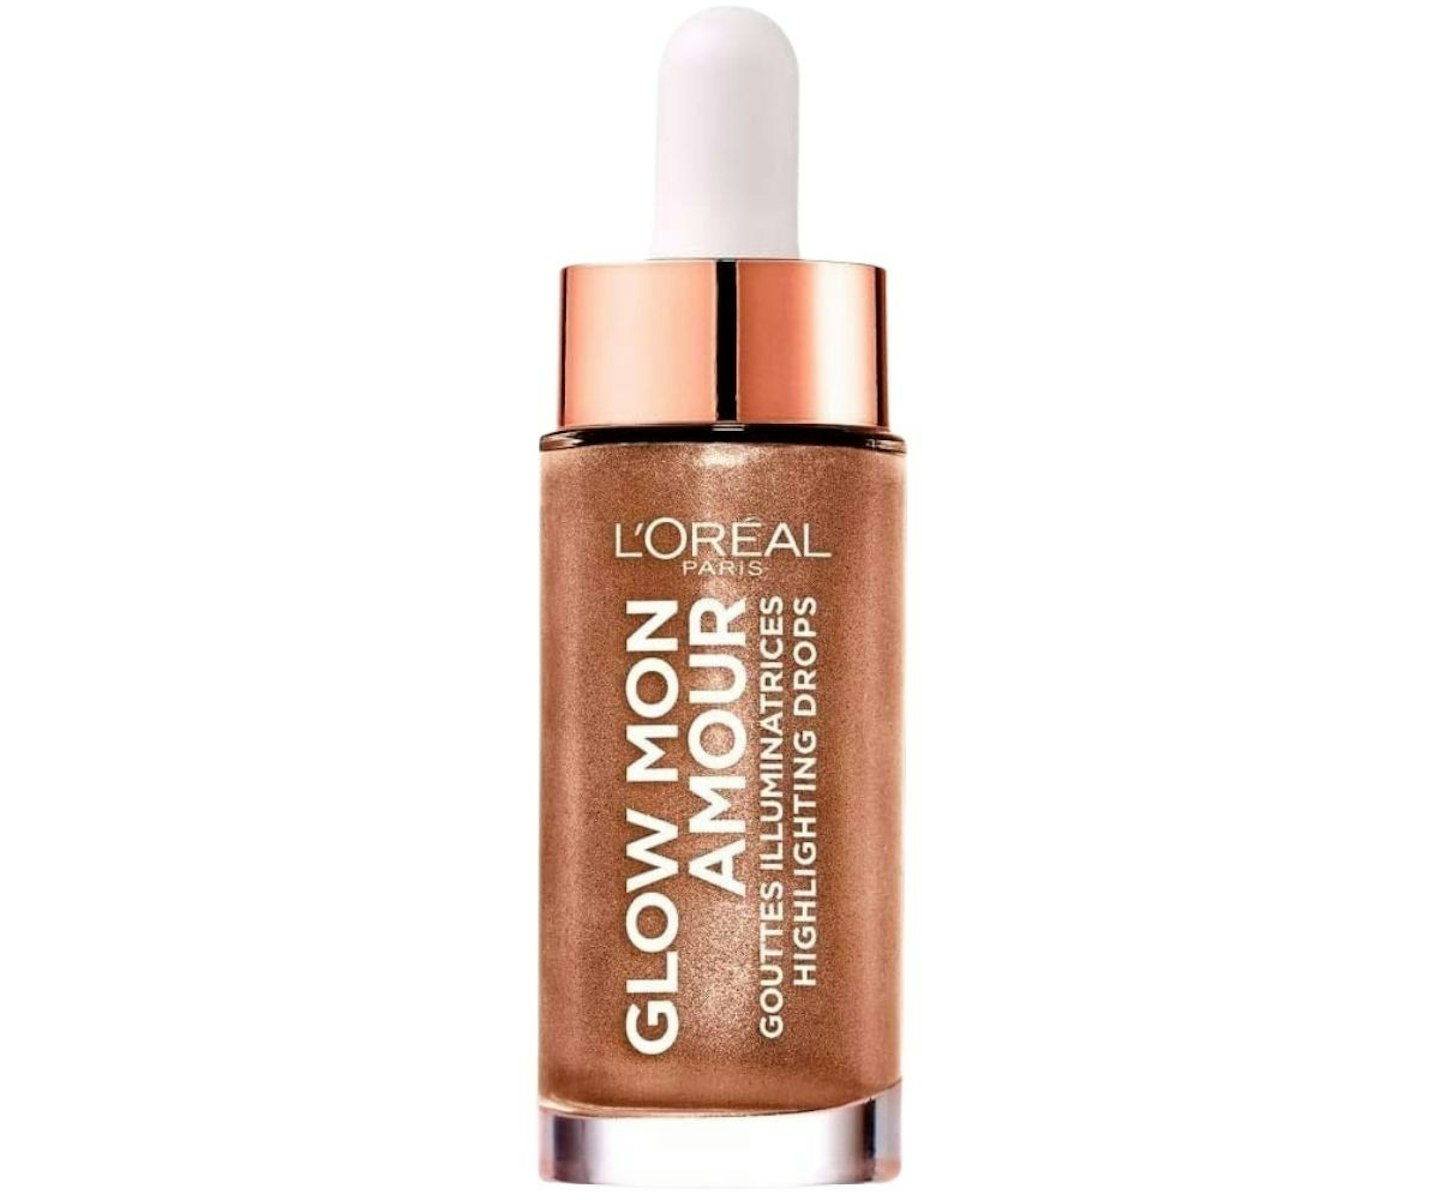 A picture of the L'Oreal Glow Mon Amour Highlighting Drops